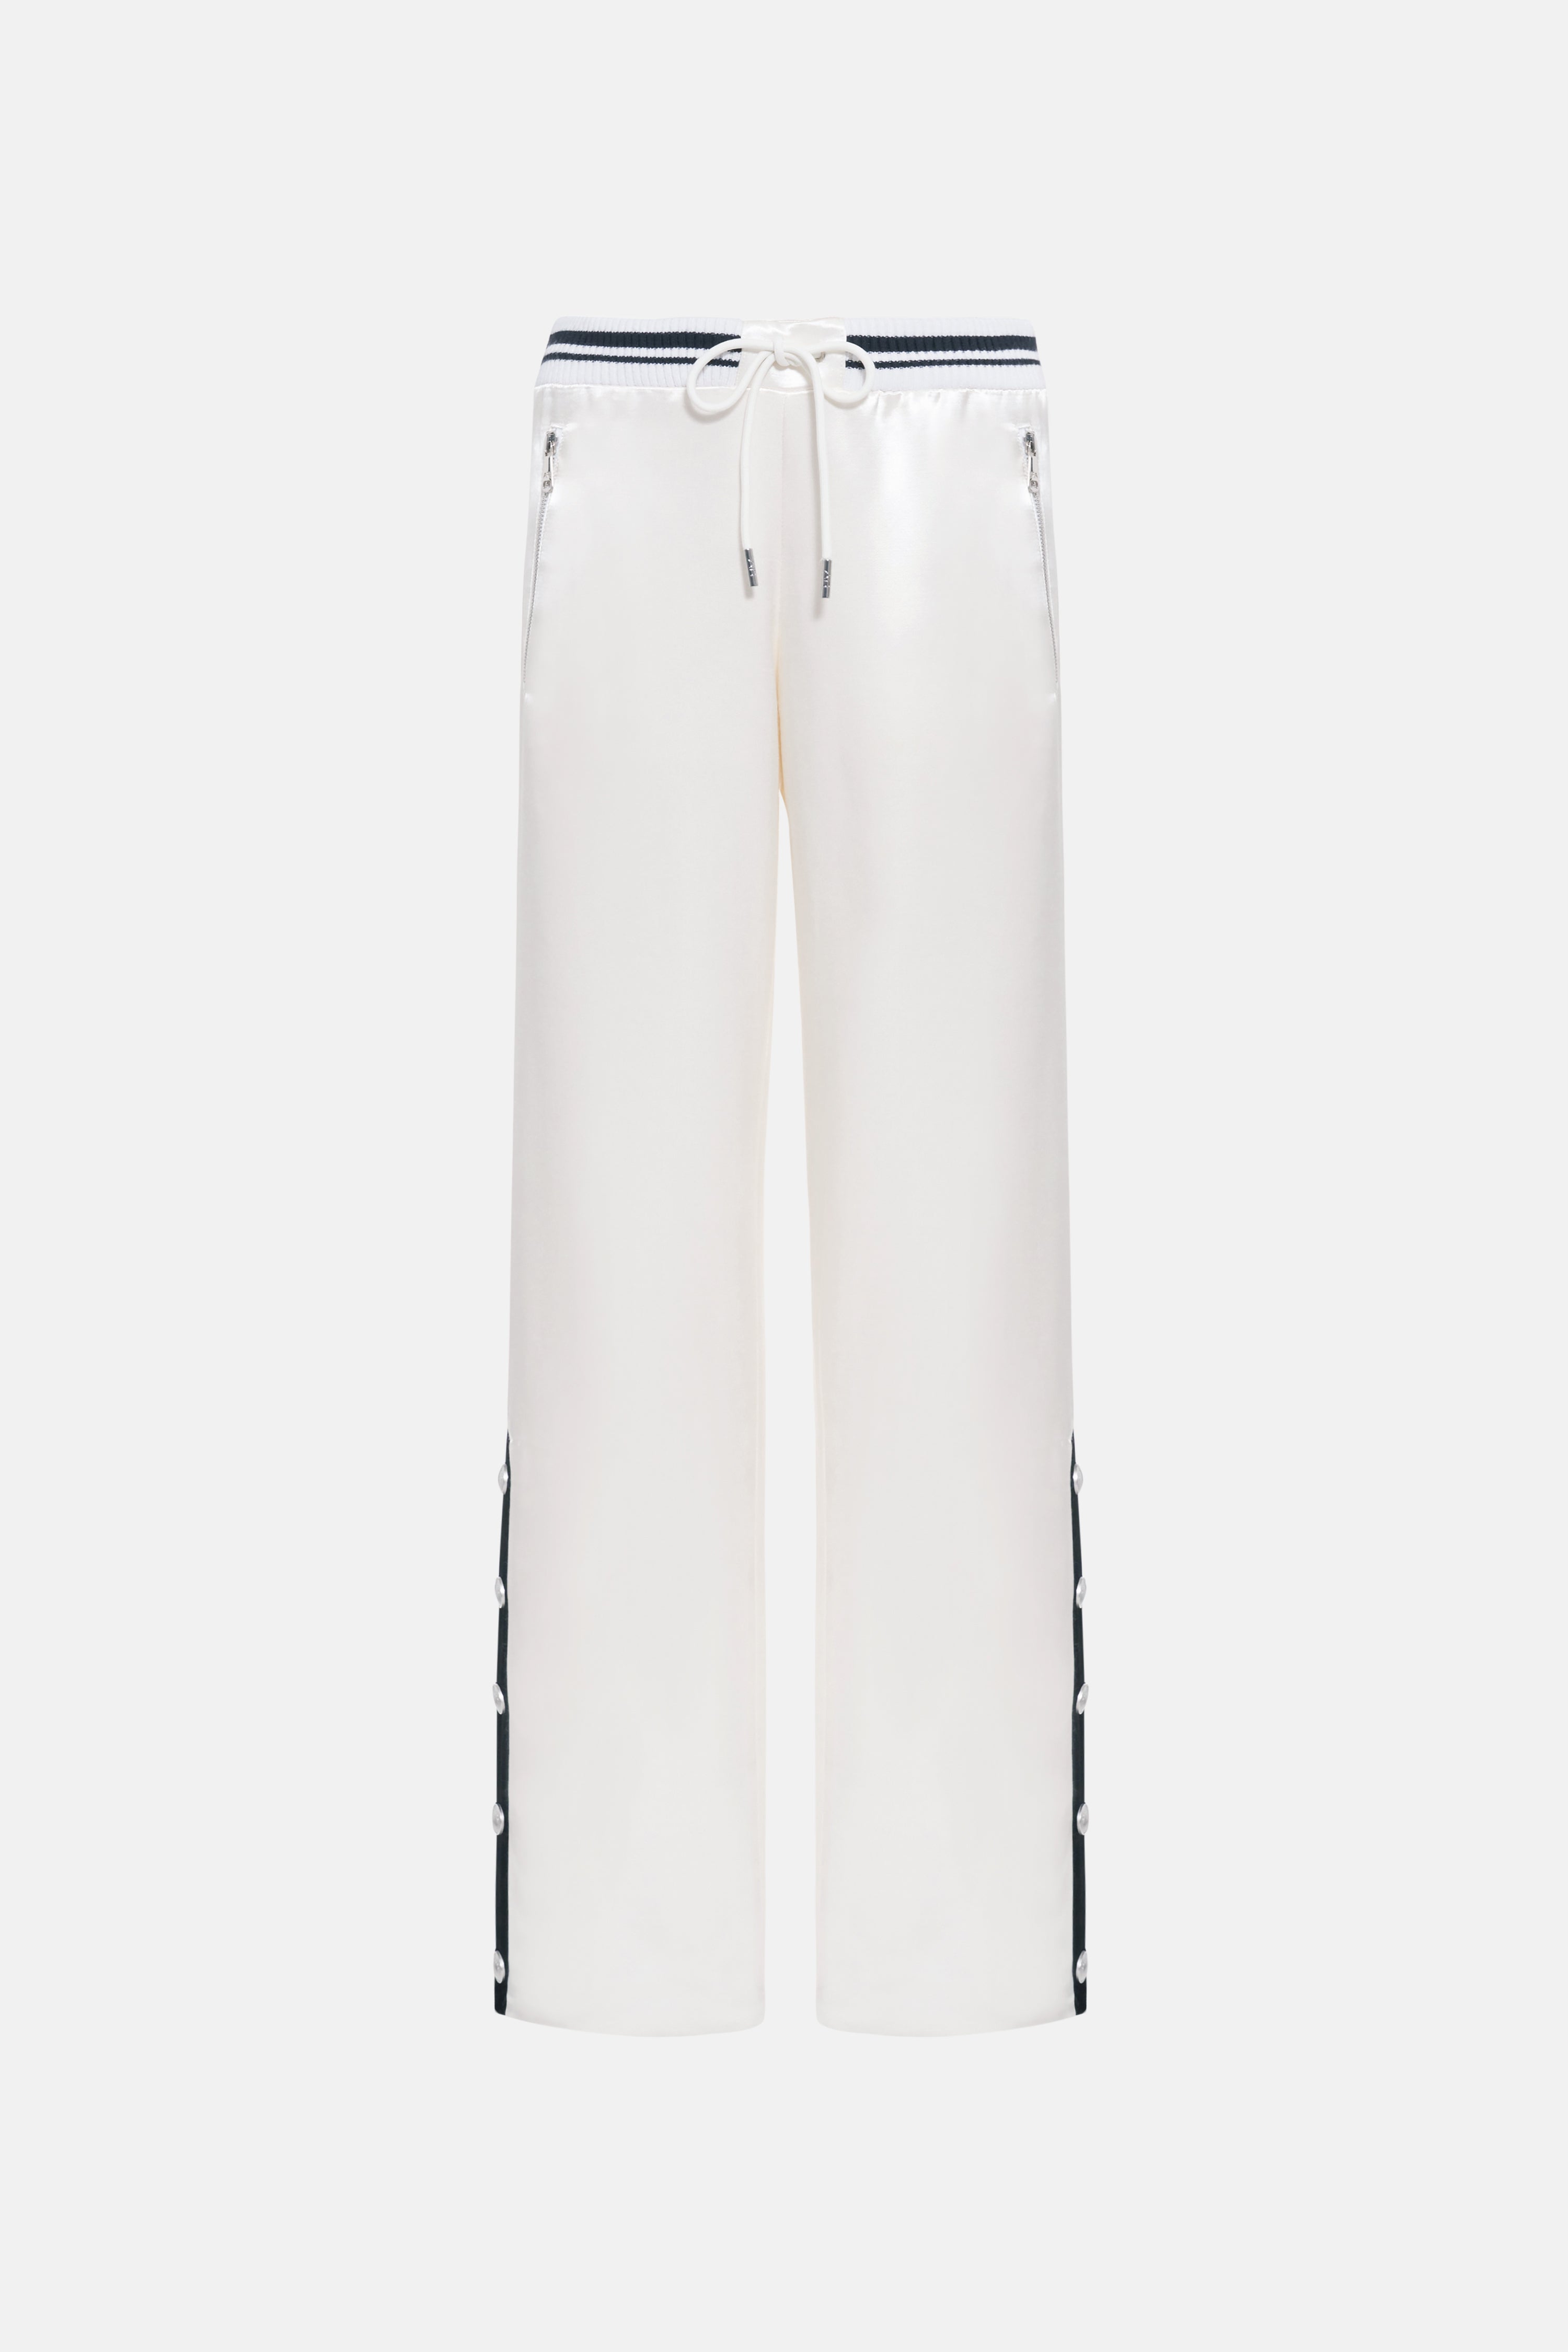 SATIN TRACK PANTS WITH BUTTONS